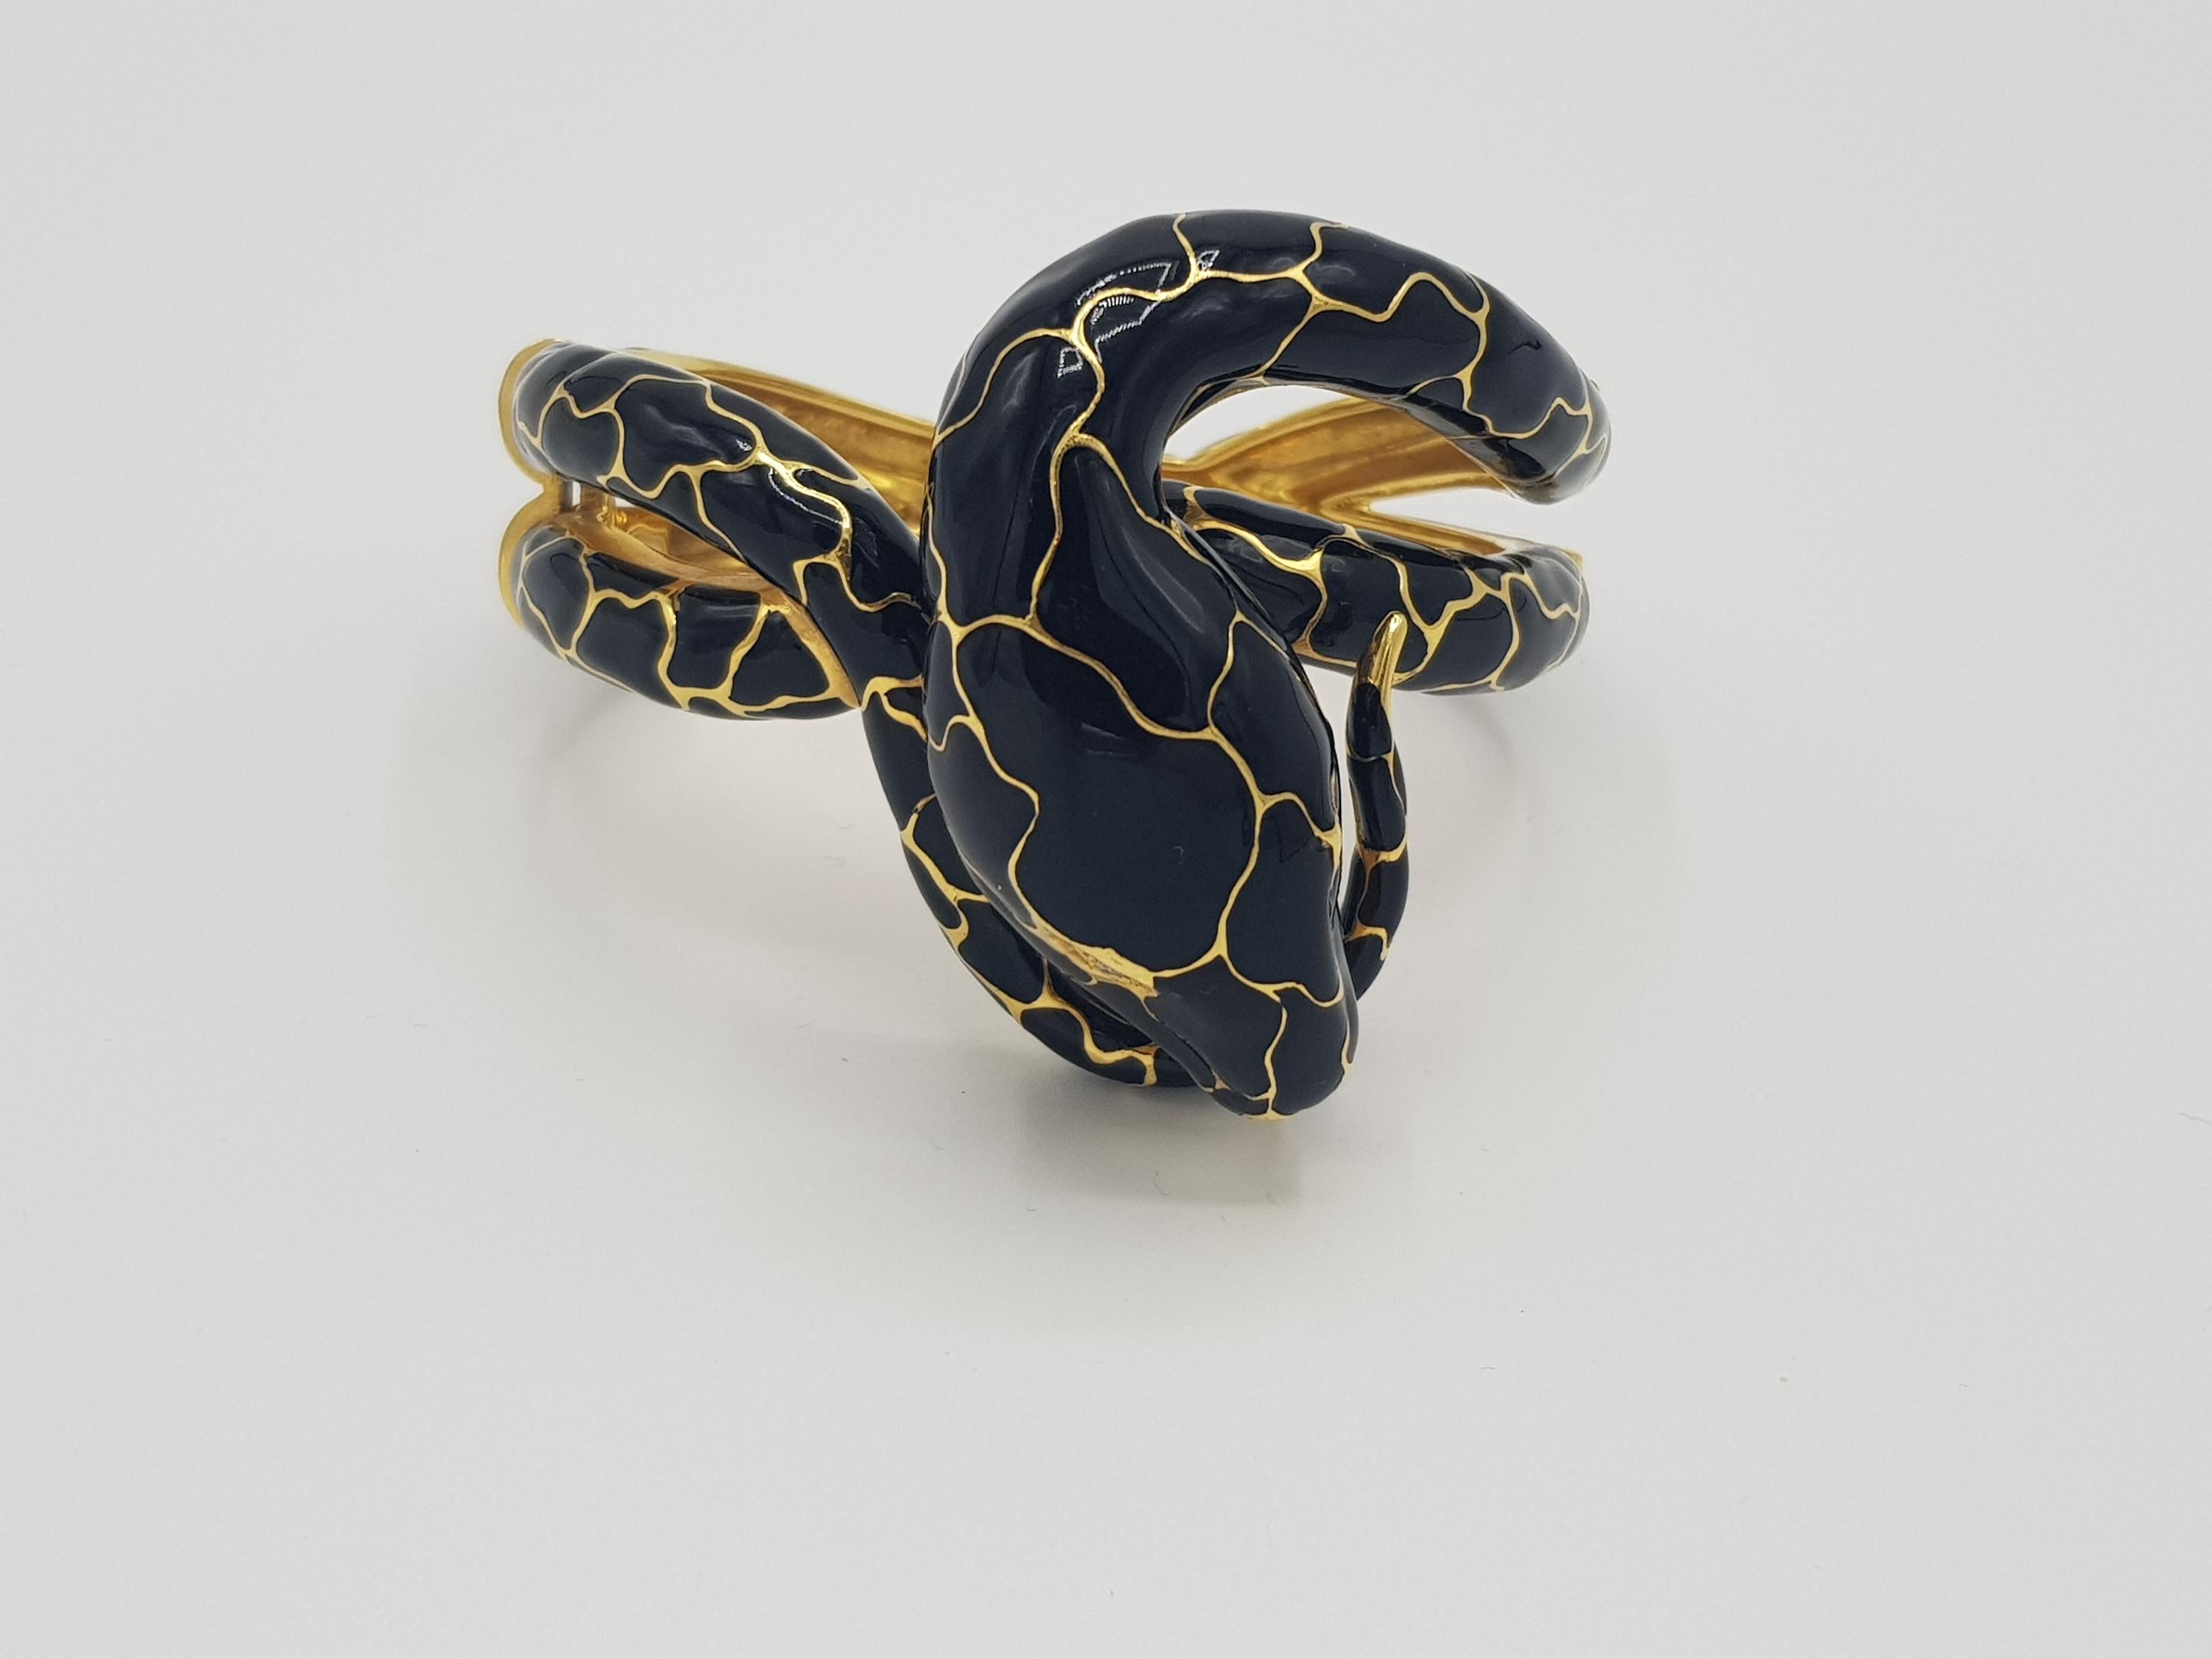 d'Avossa Snake Bracelet , in 18Kt yellow gold and black enamel, is the symbol of grace, seduction and mystery.
Two white Diamonds sparkle in the eyes.

Unique Piece